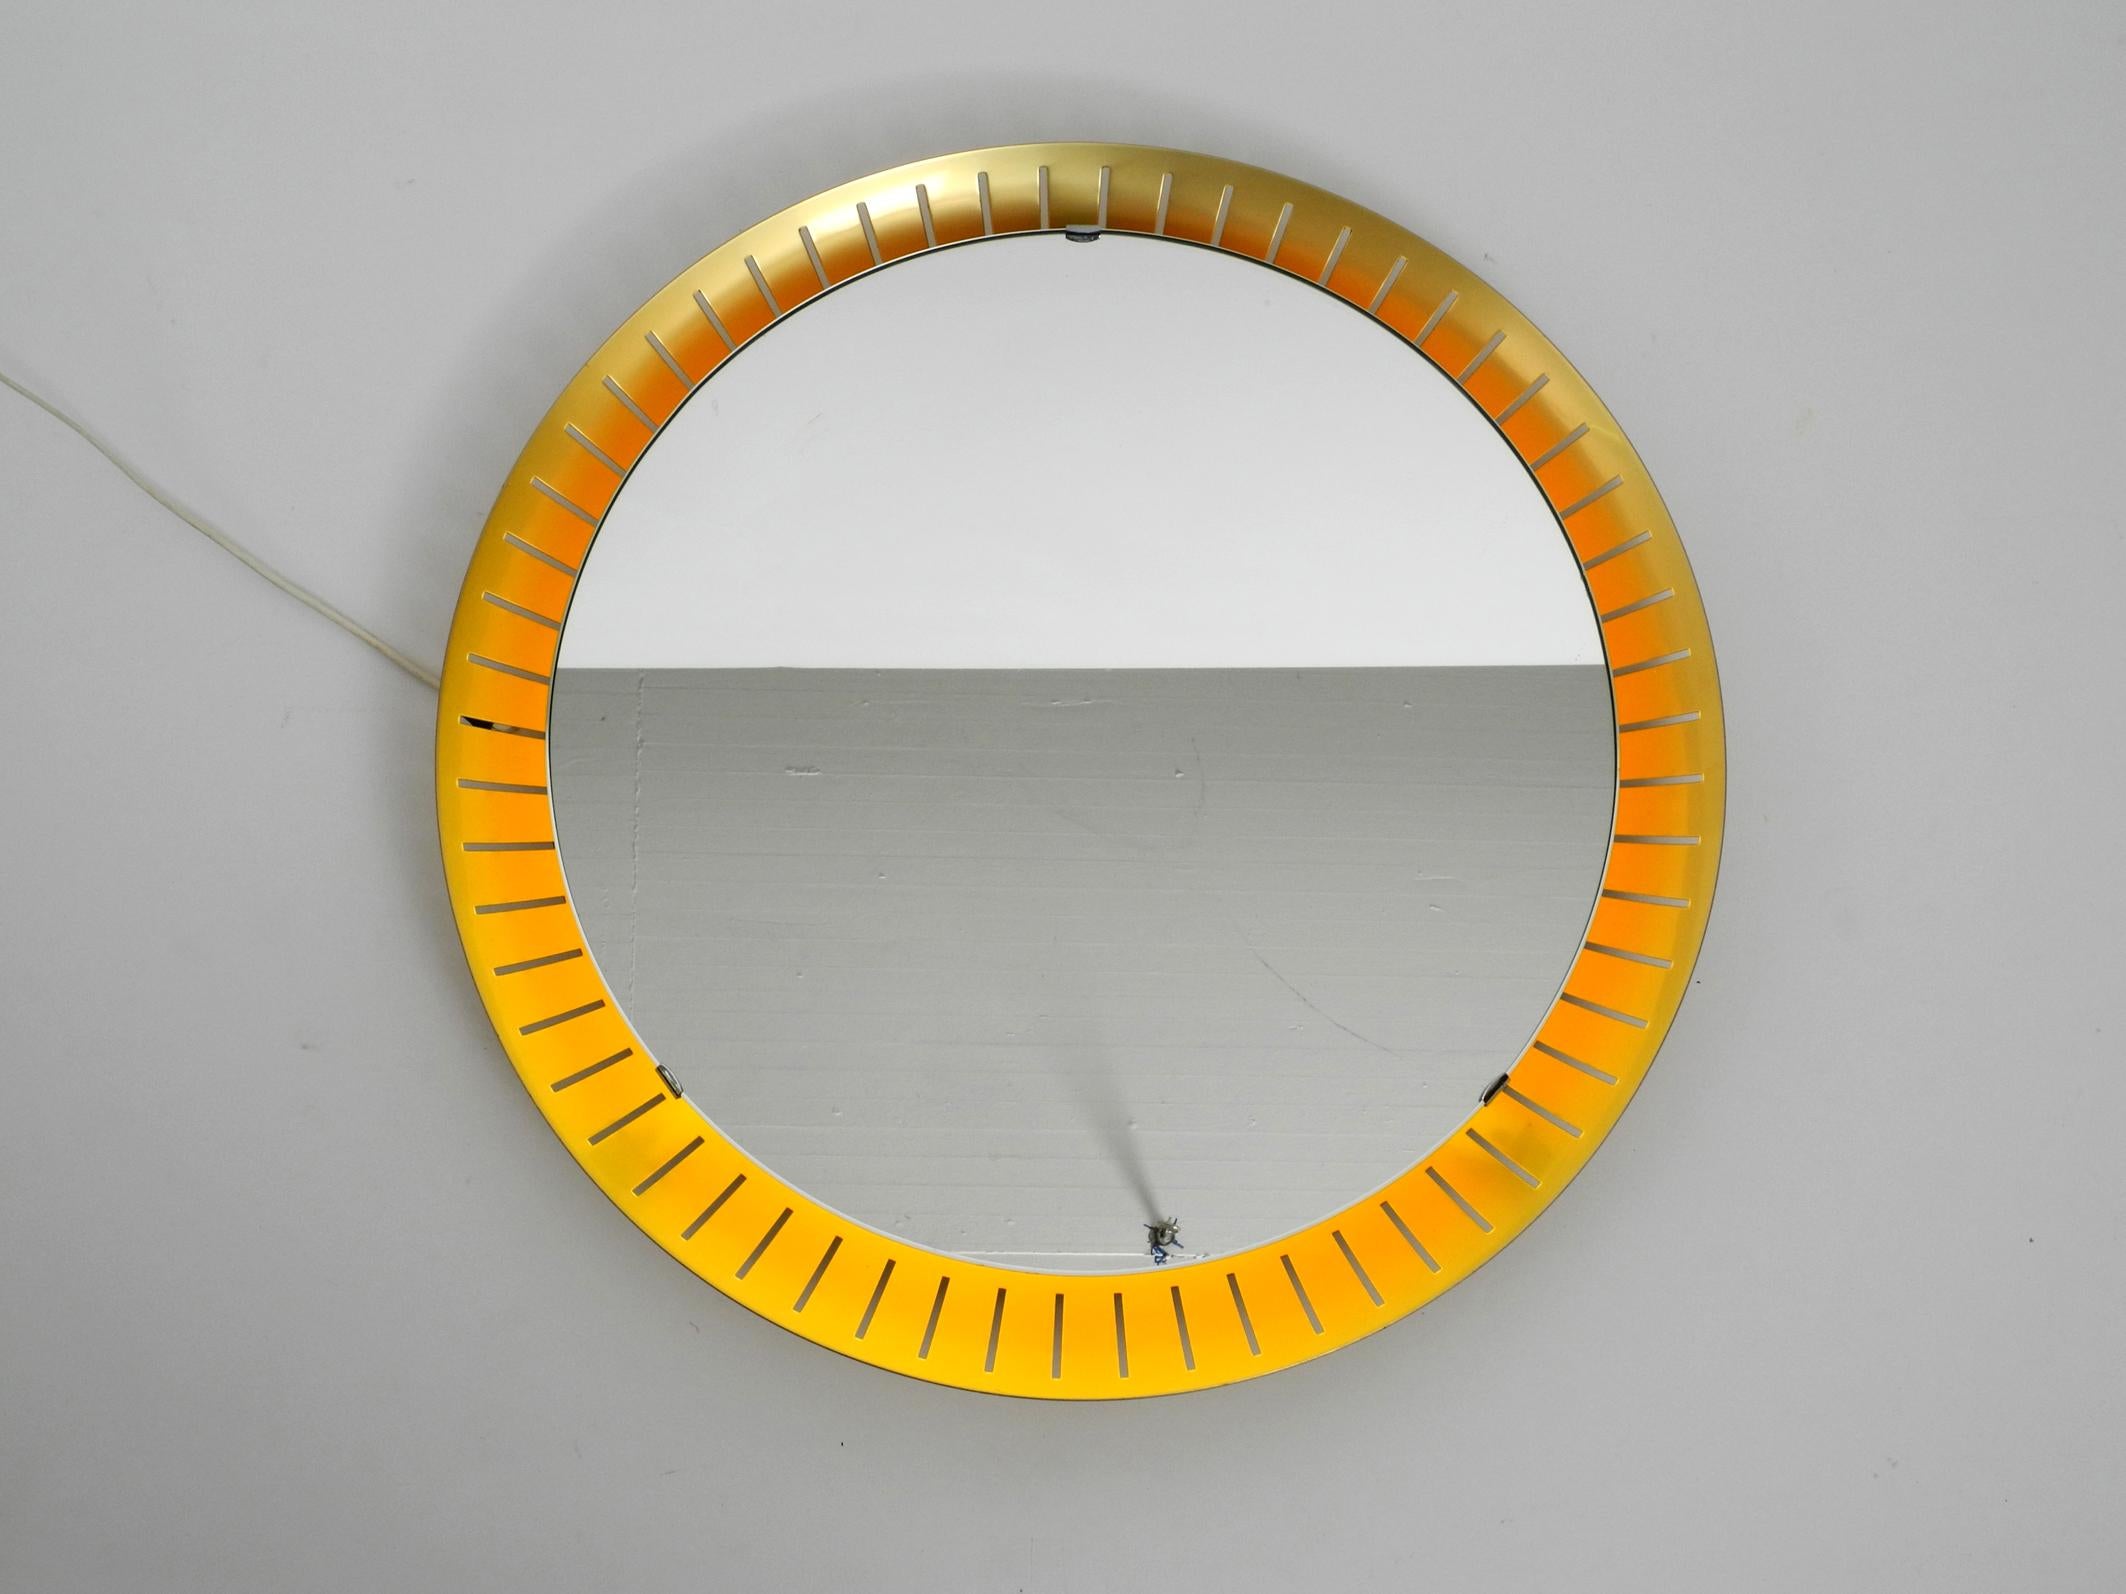 Rare beautiful midcentury illuminated mirror by Hillebrand. Made in Germany.
Aluminum frame is anodised with brass. Beautiful minimalistic 1950s design.
Very thick solid polished mirror glass is hung on the metal frame.
A round neon tube for